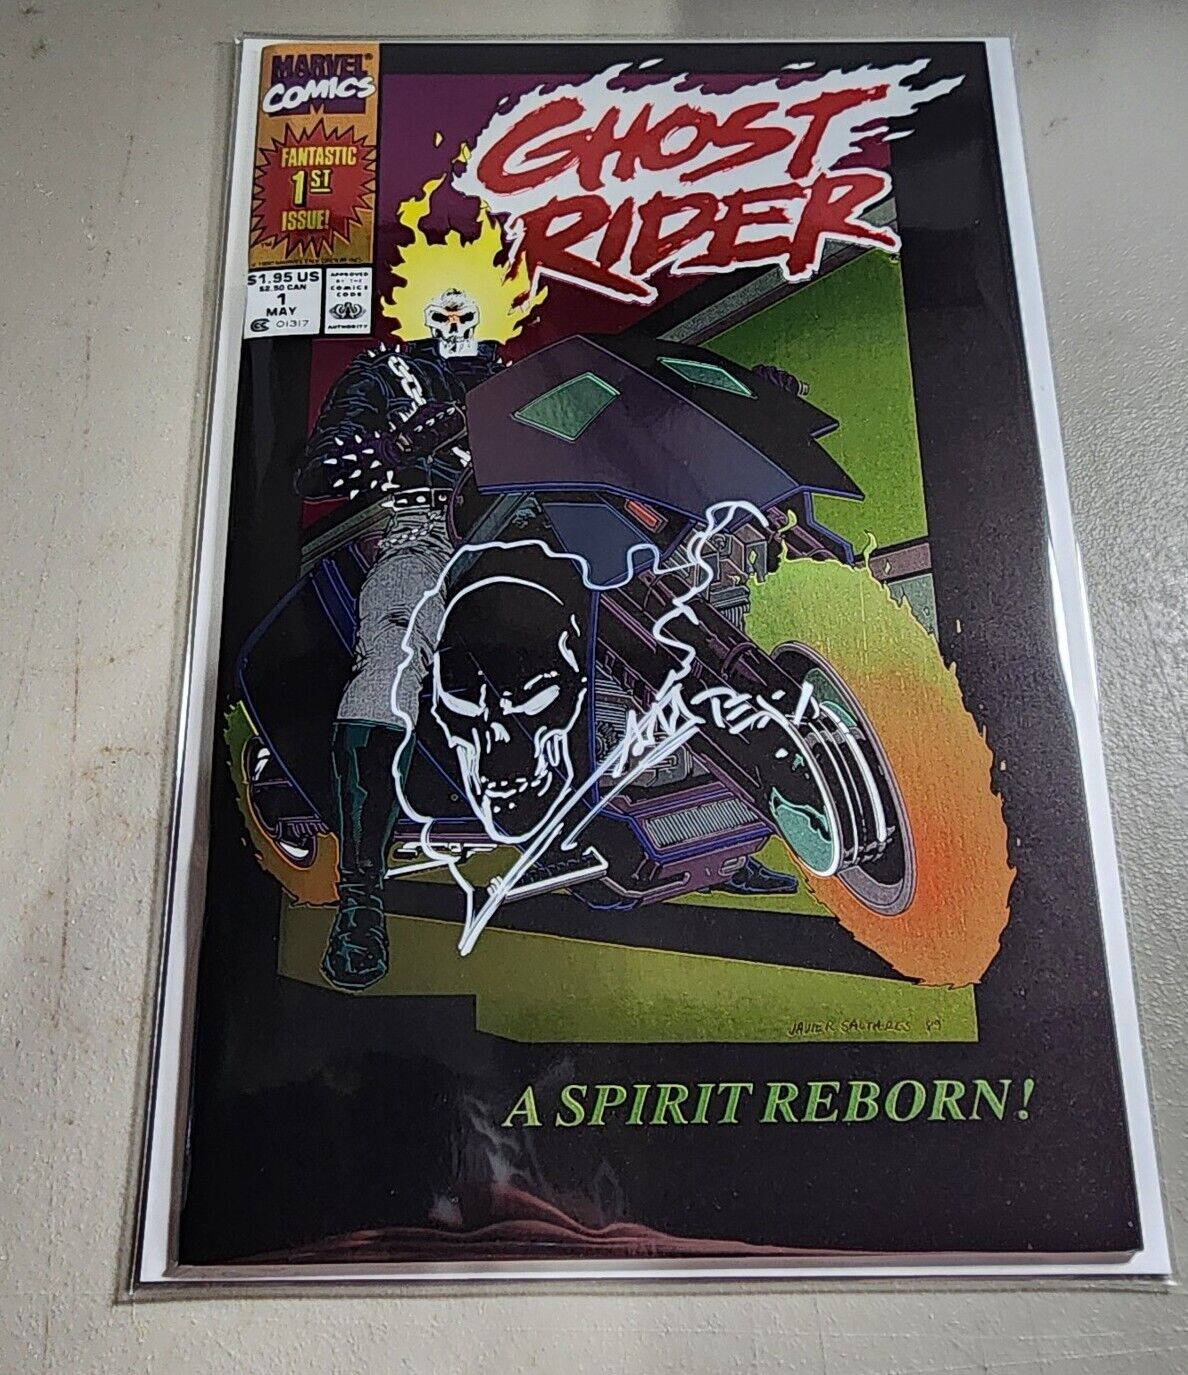 Ghostrider #1 Exclusive Mexican Foil Signed +Remarqued by Mark Texeria